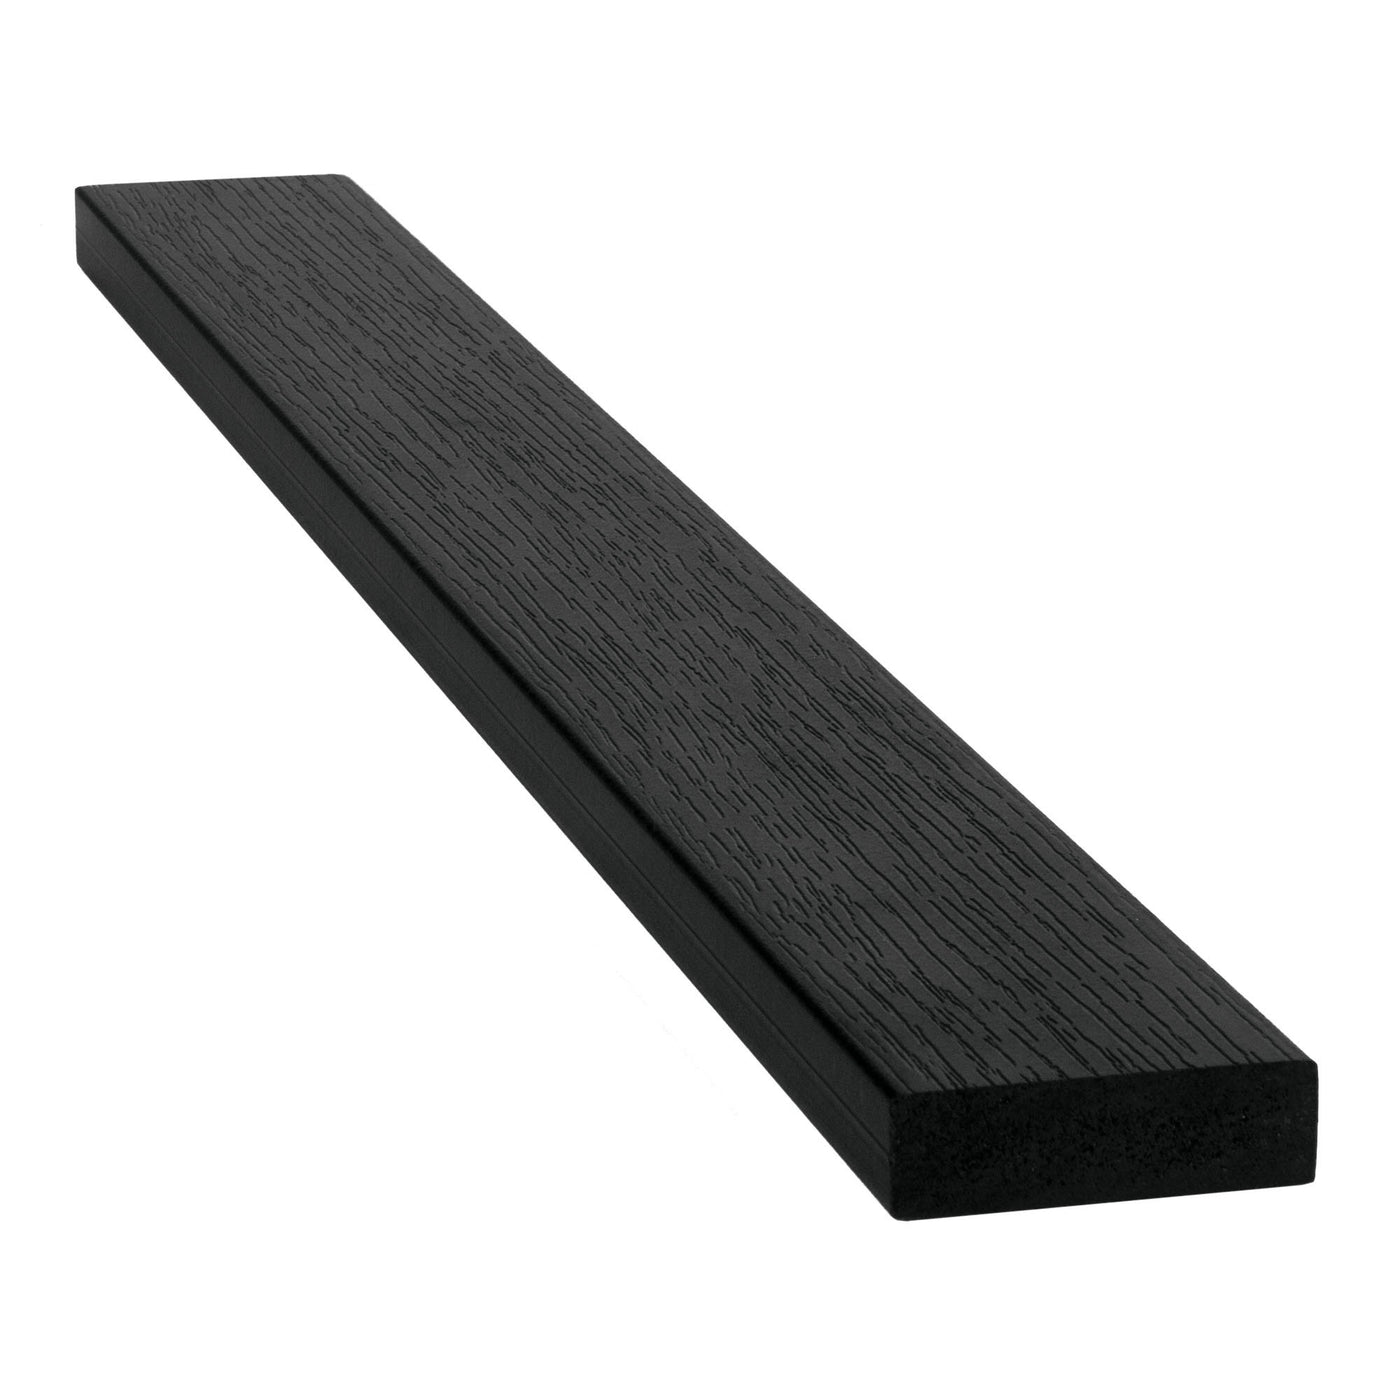 Everwood synthetic wood dimensional lumber {1” x 3” x 6ft} Nominal (recycled resin) - 10 Pieces Highwood USA Black 